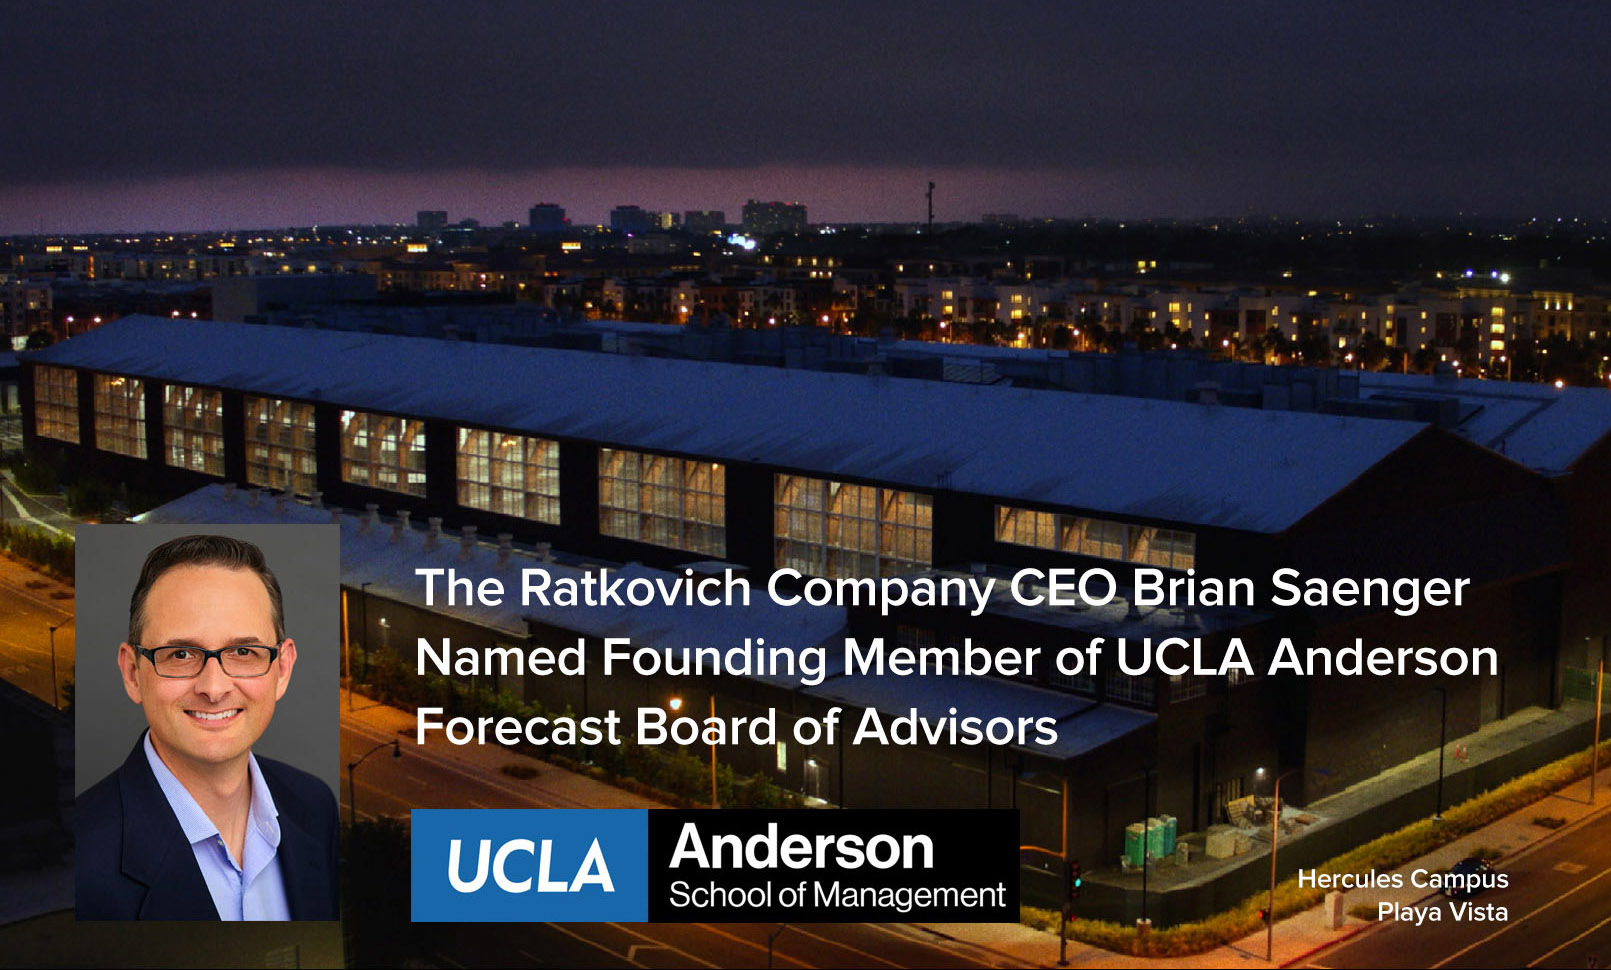 Ratkovich CEO Brian Saenger Named Founding Member of UCLA Anderson Forecast Board